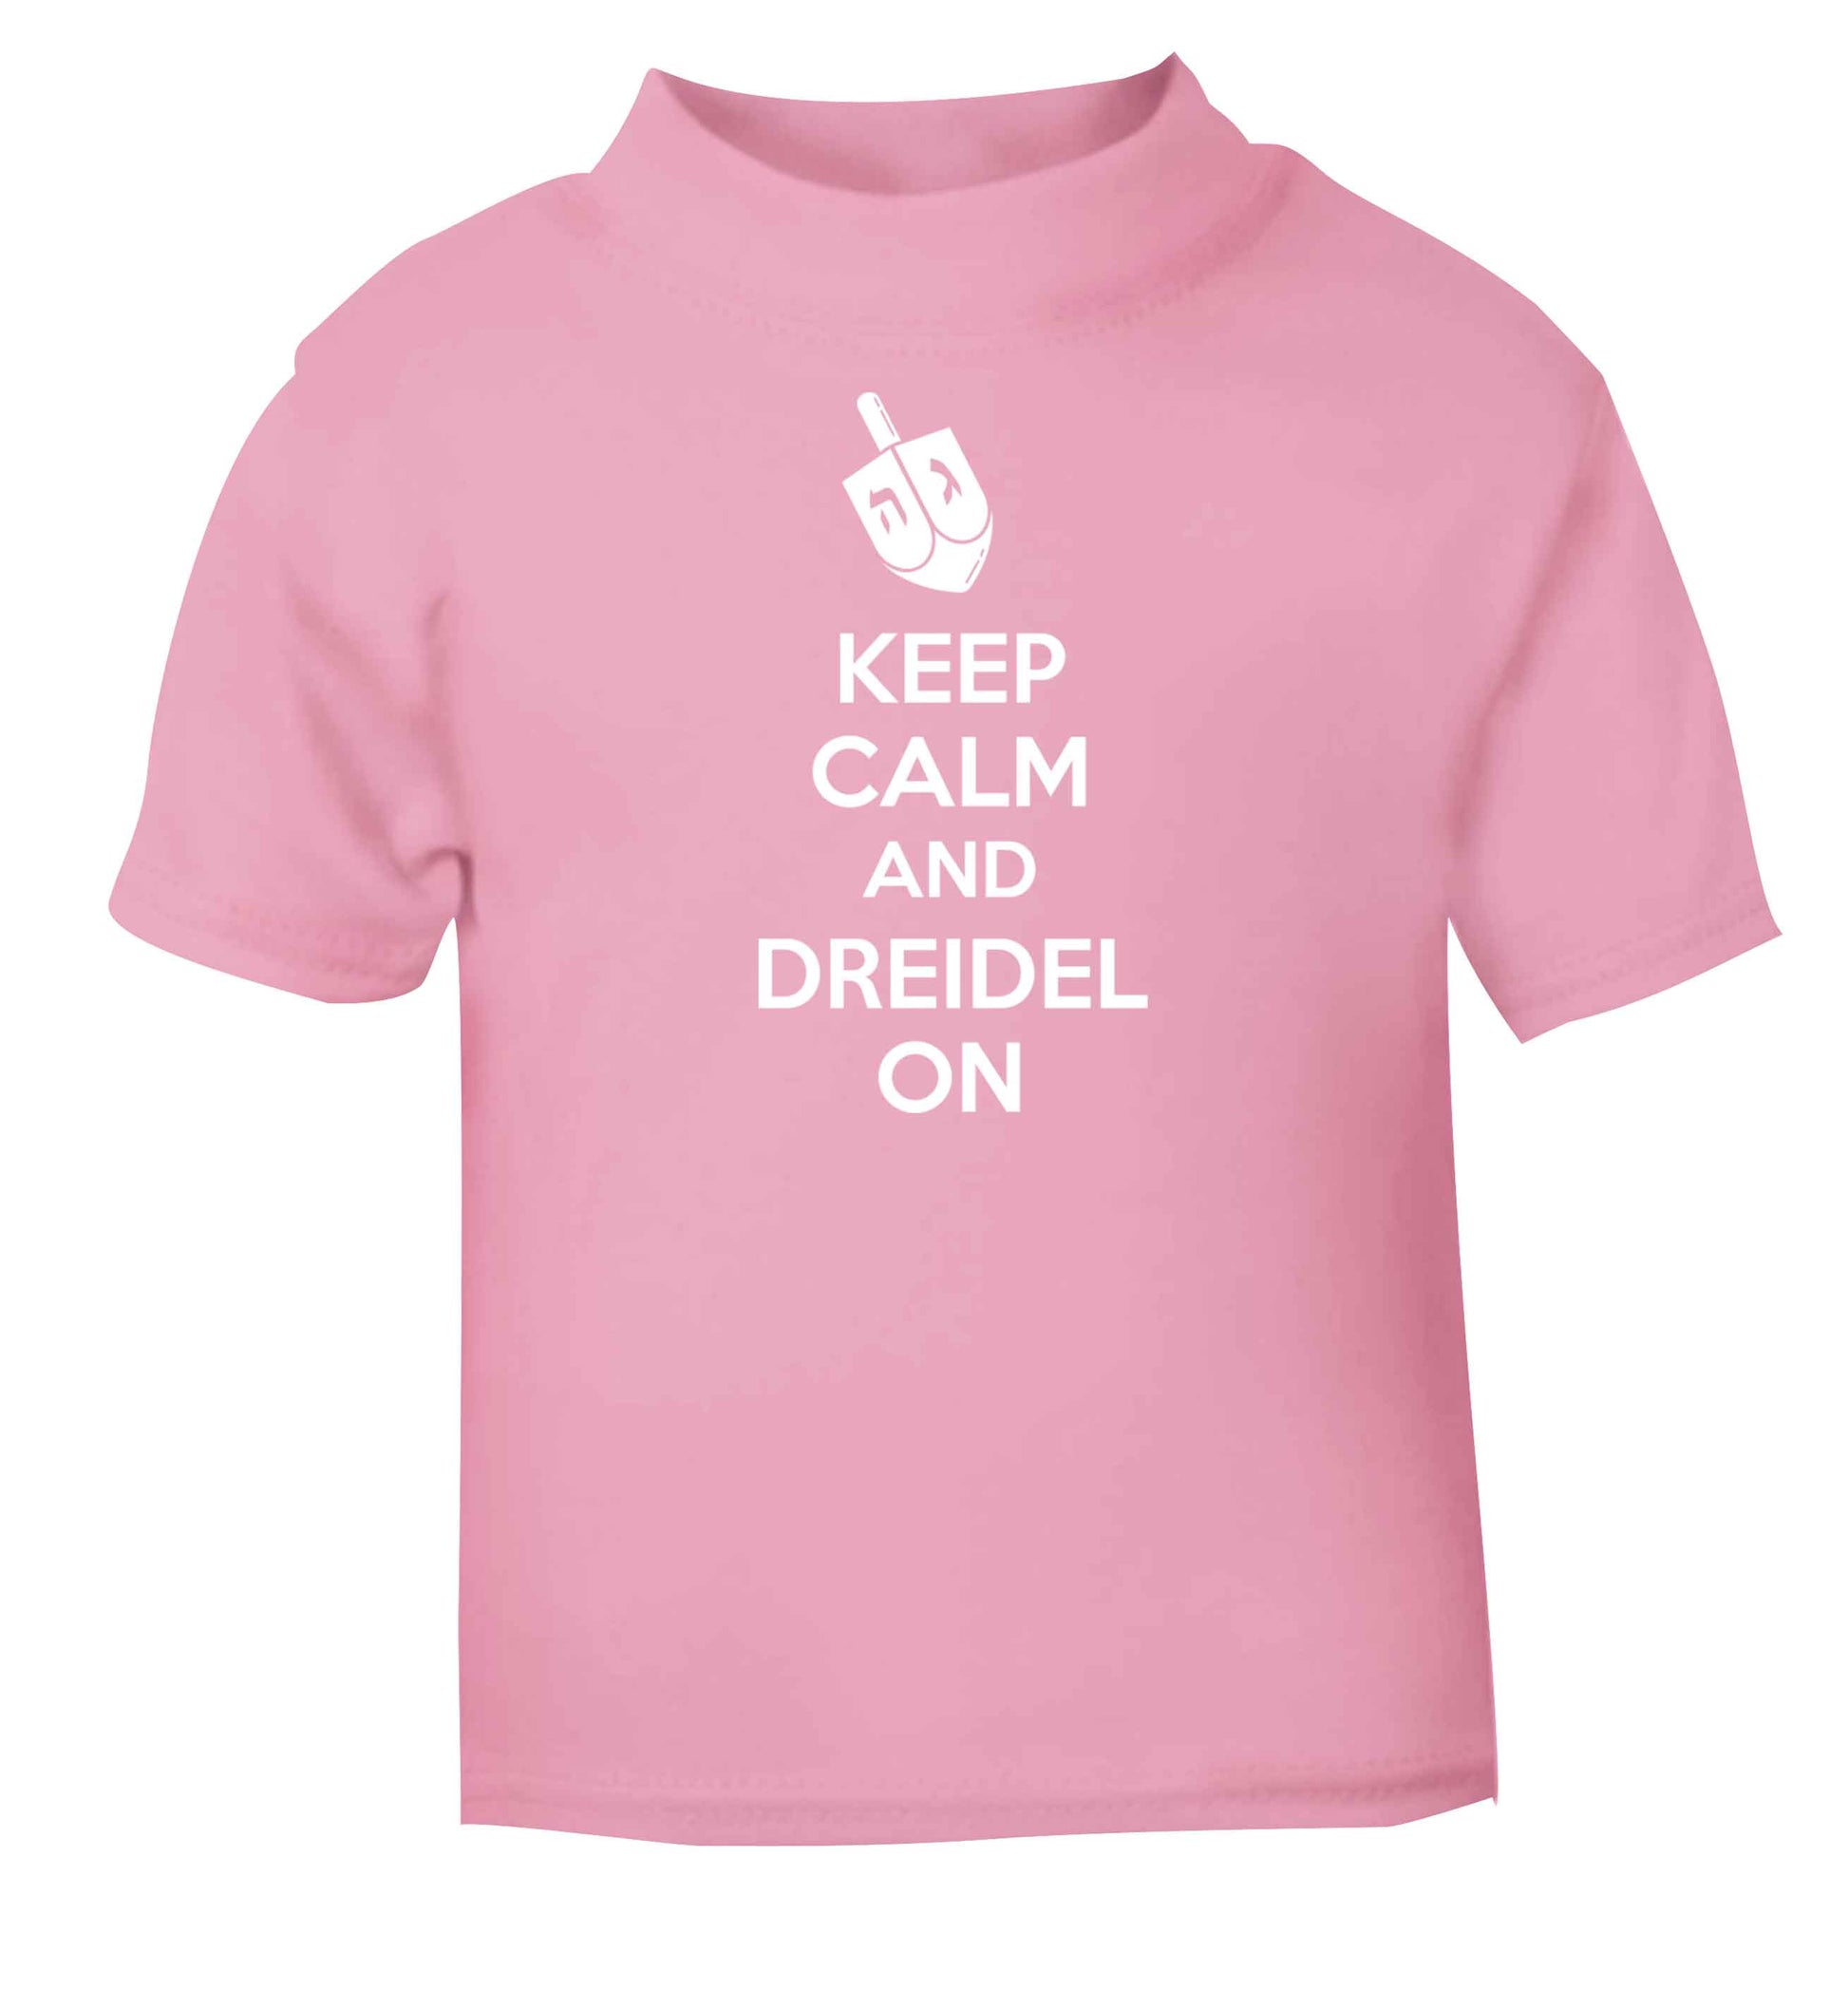 Keep calm and dreidel on light pink baby toddler Tshirt 2 Years